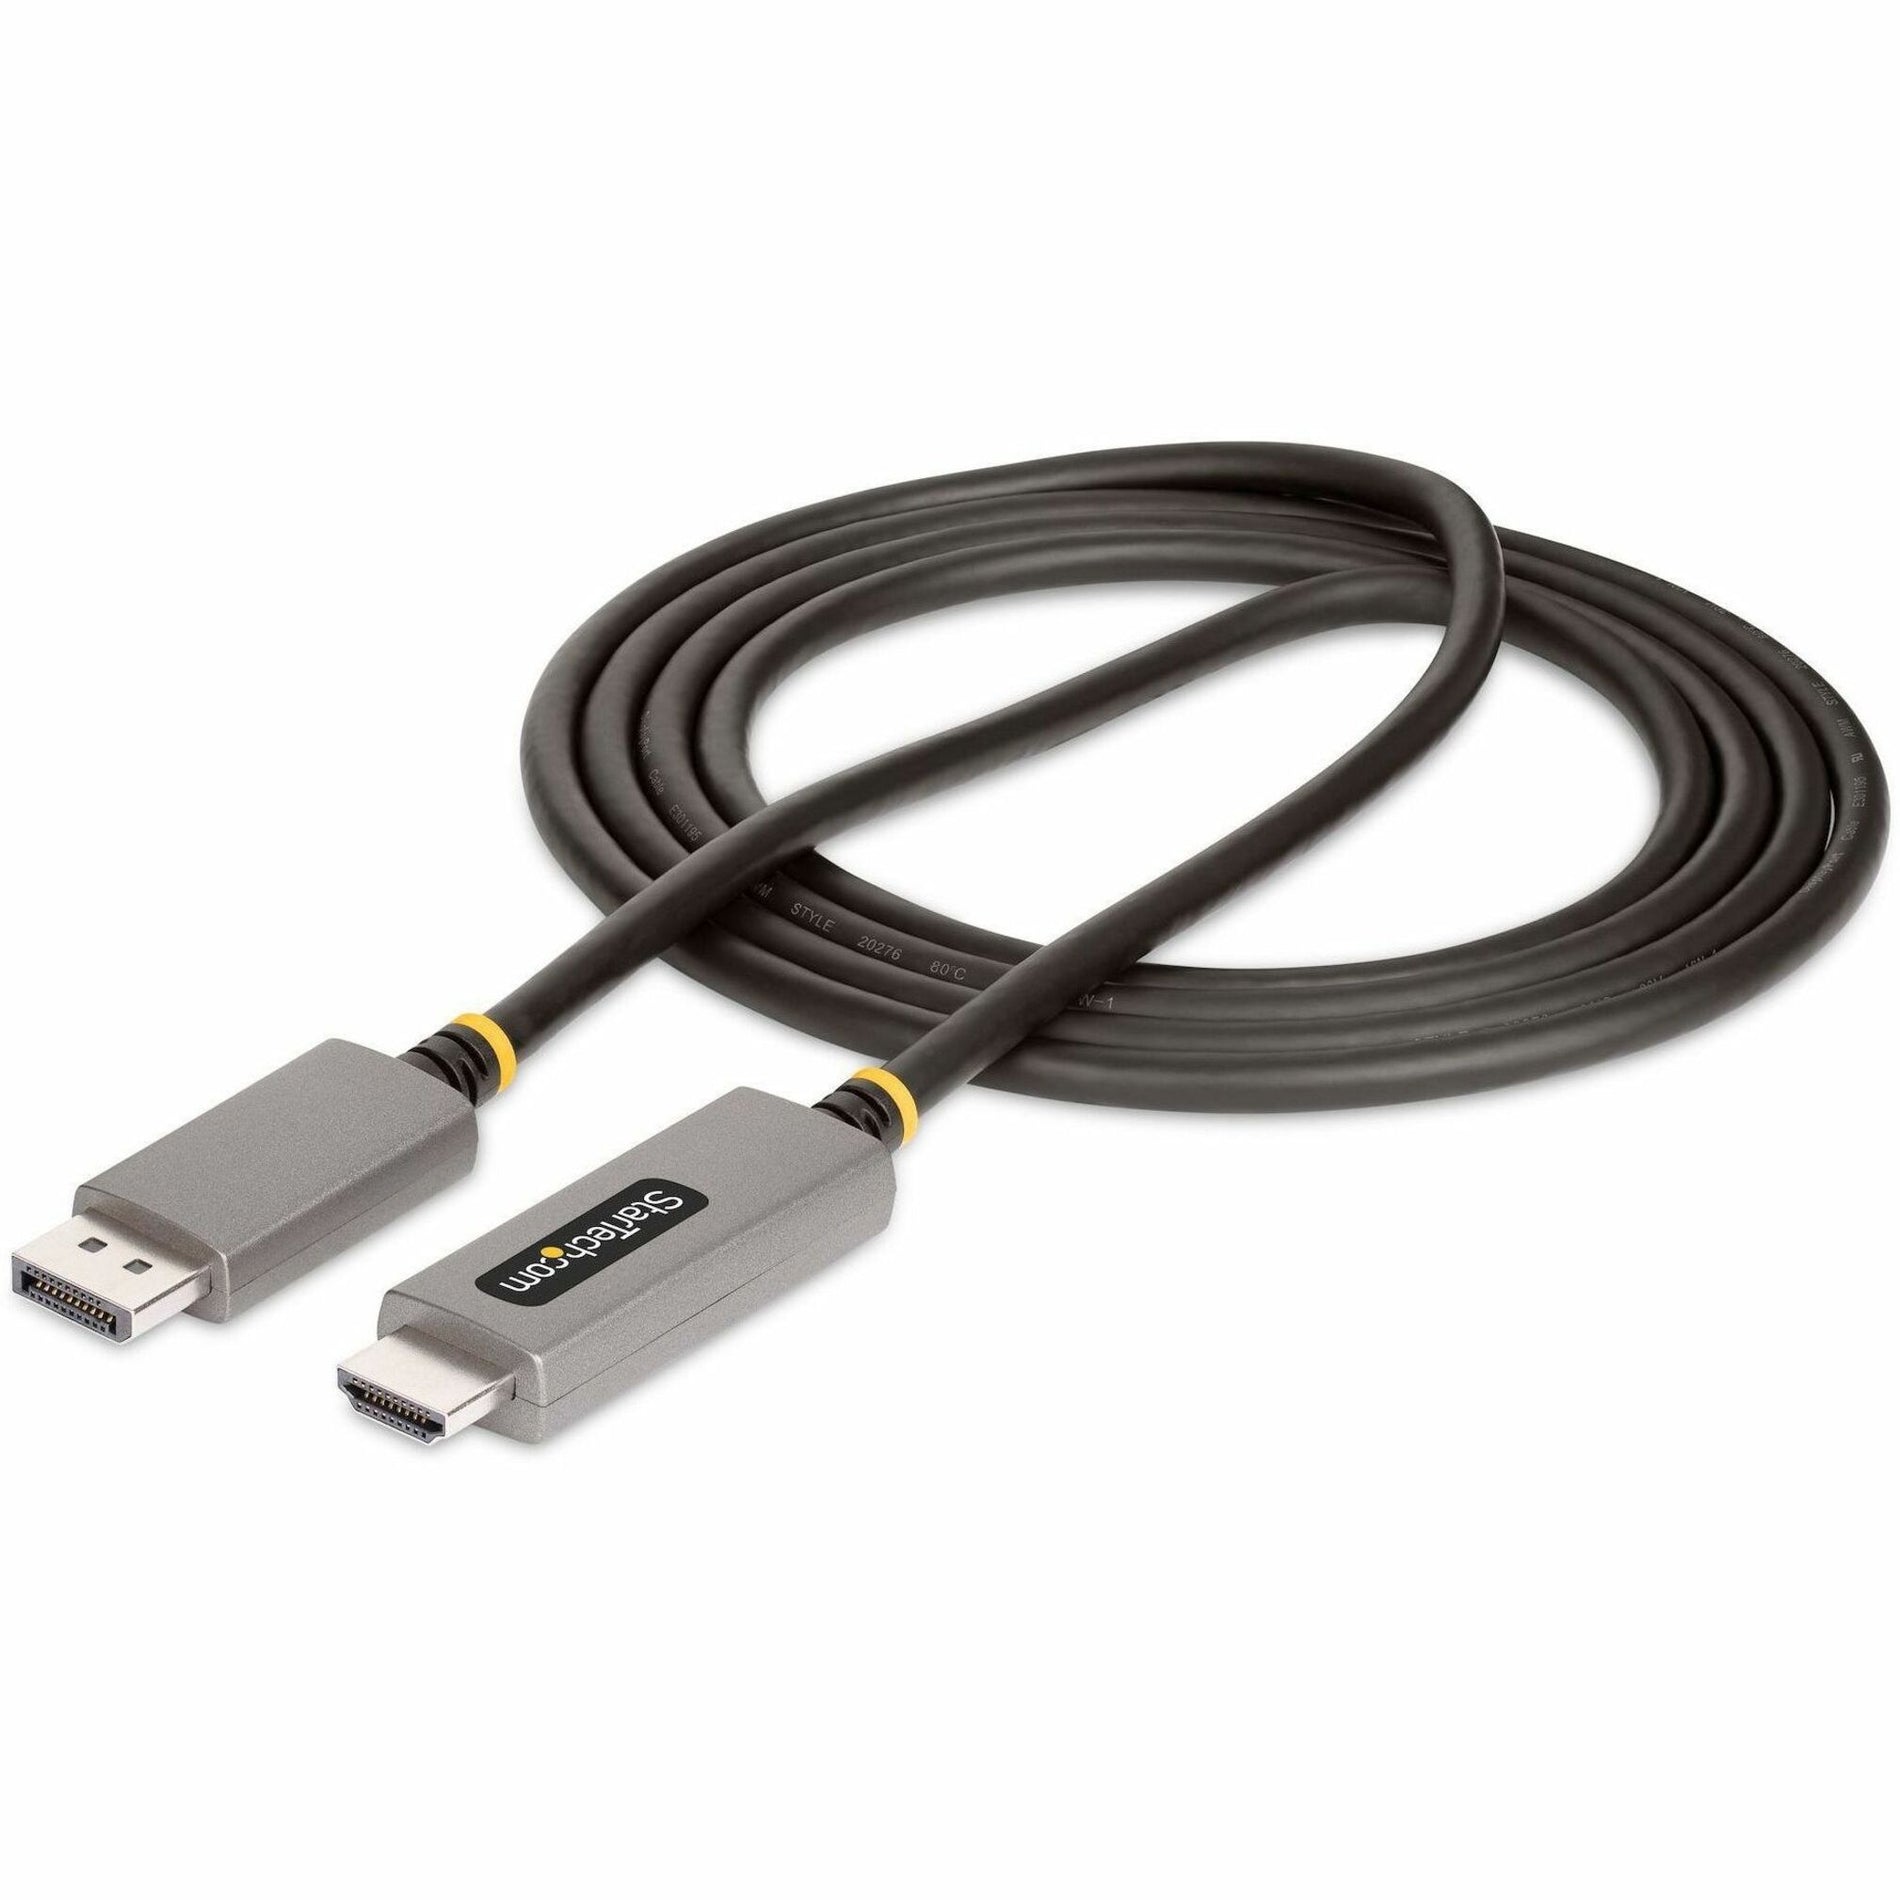 StarTech.com 133DISPLAYPORTHDMI21 DisplayPort/HDMI Audio/Video Cable, 6 ft, 7680 x 4320, HDR Support